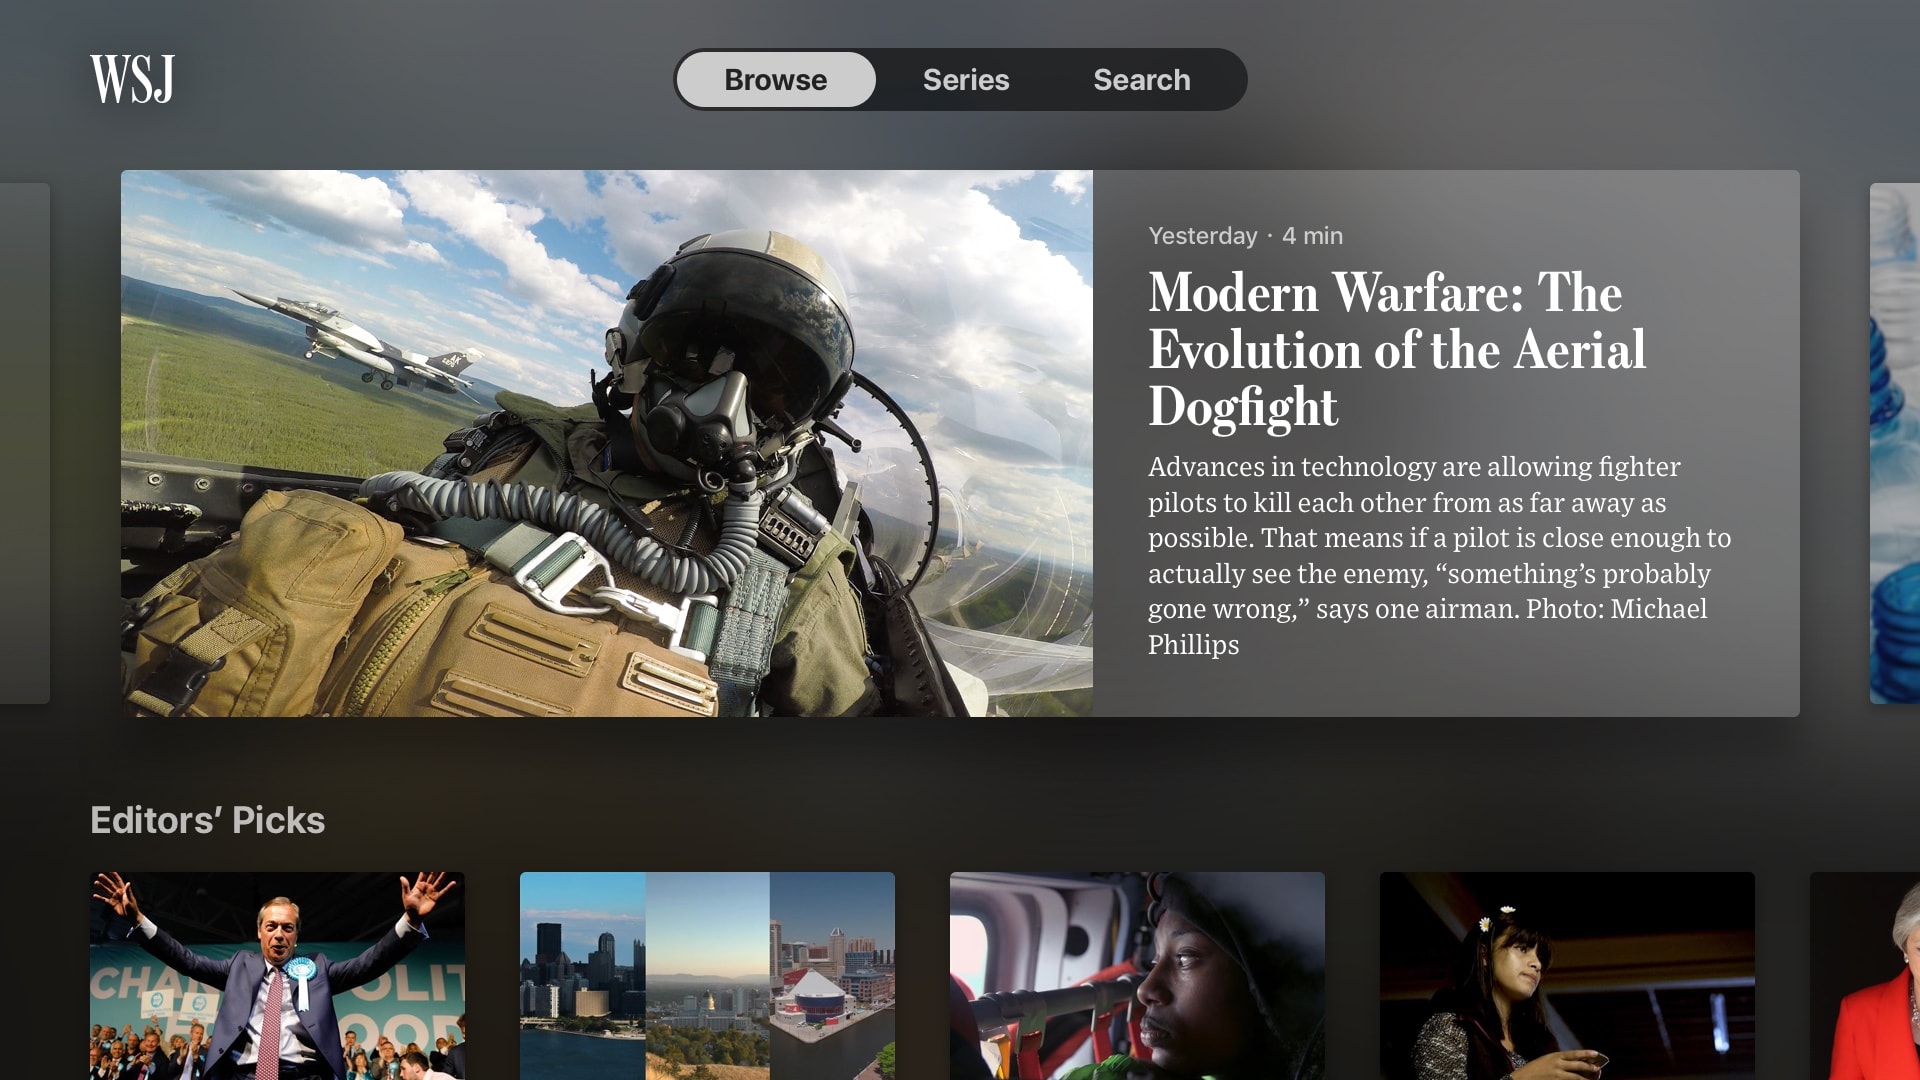 The Wall Street Journal Apple TV home screen showing featured videos.